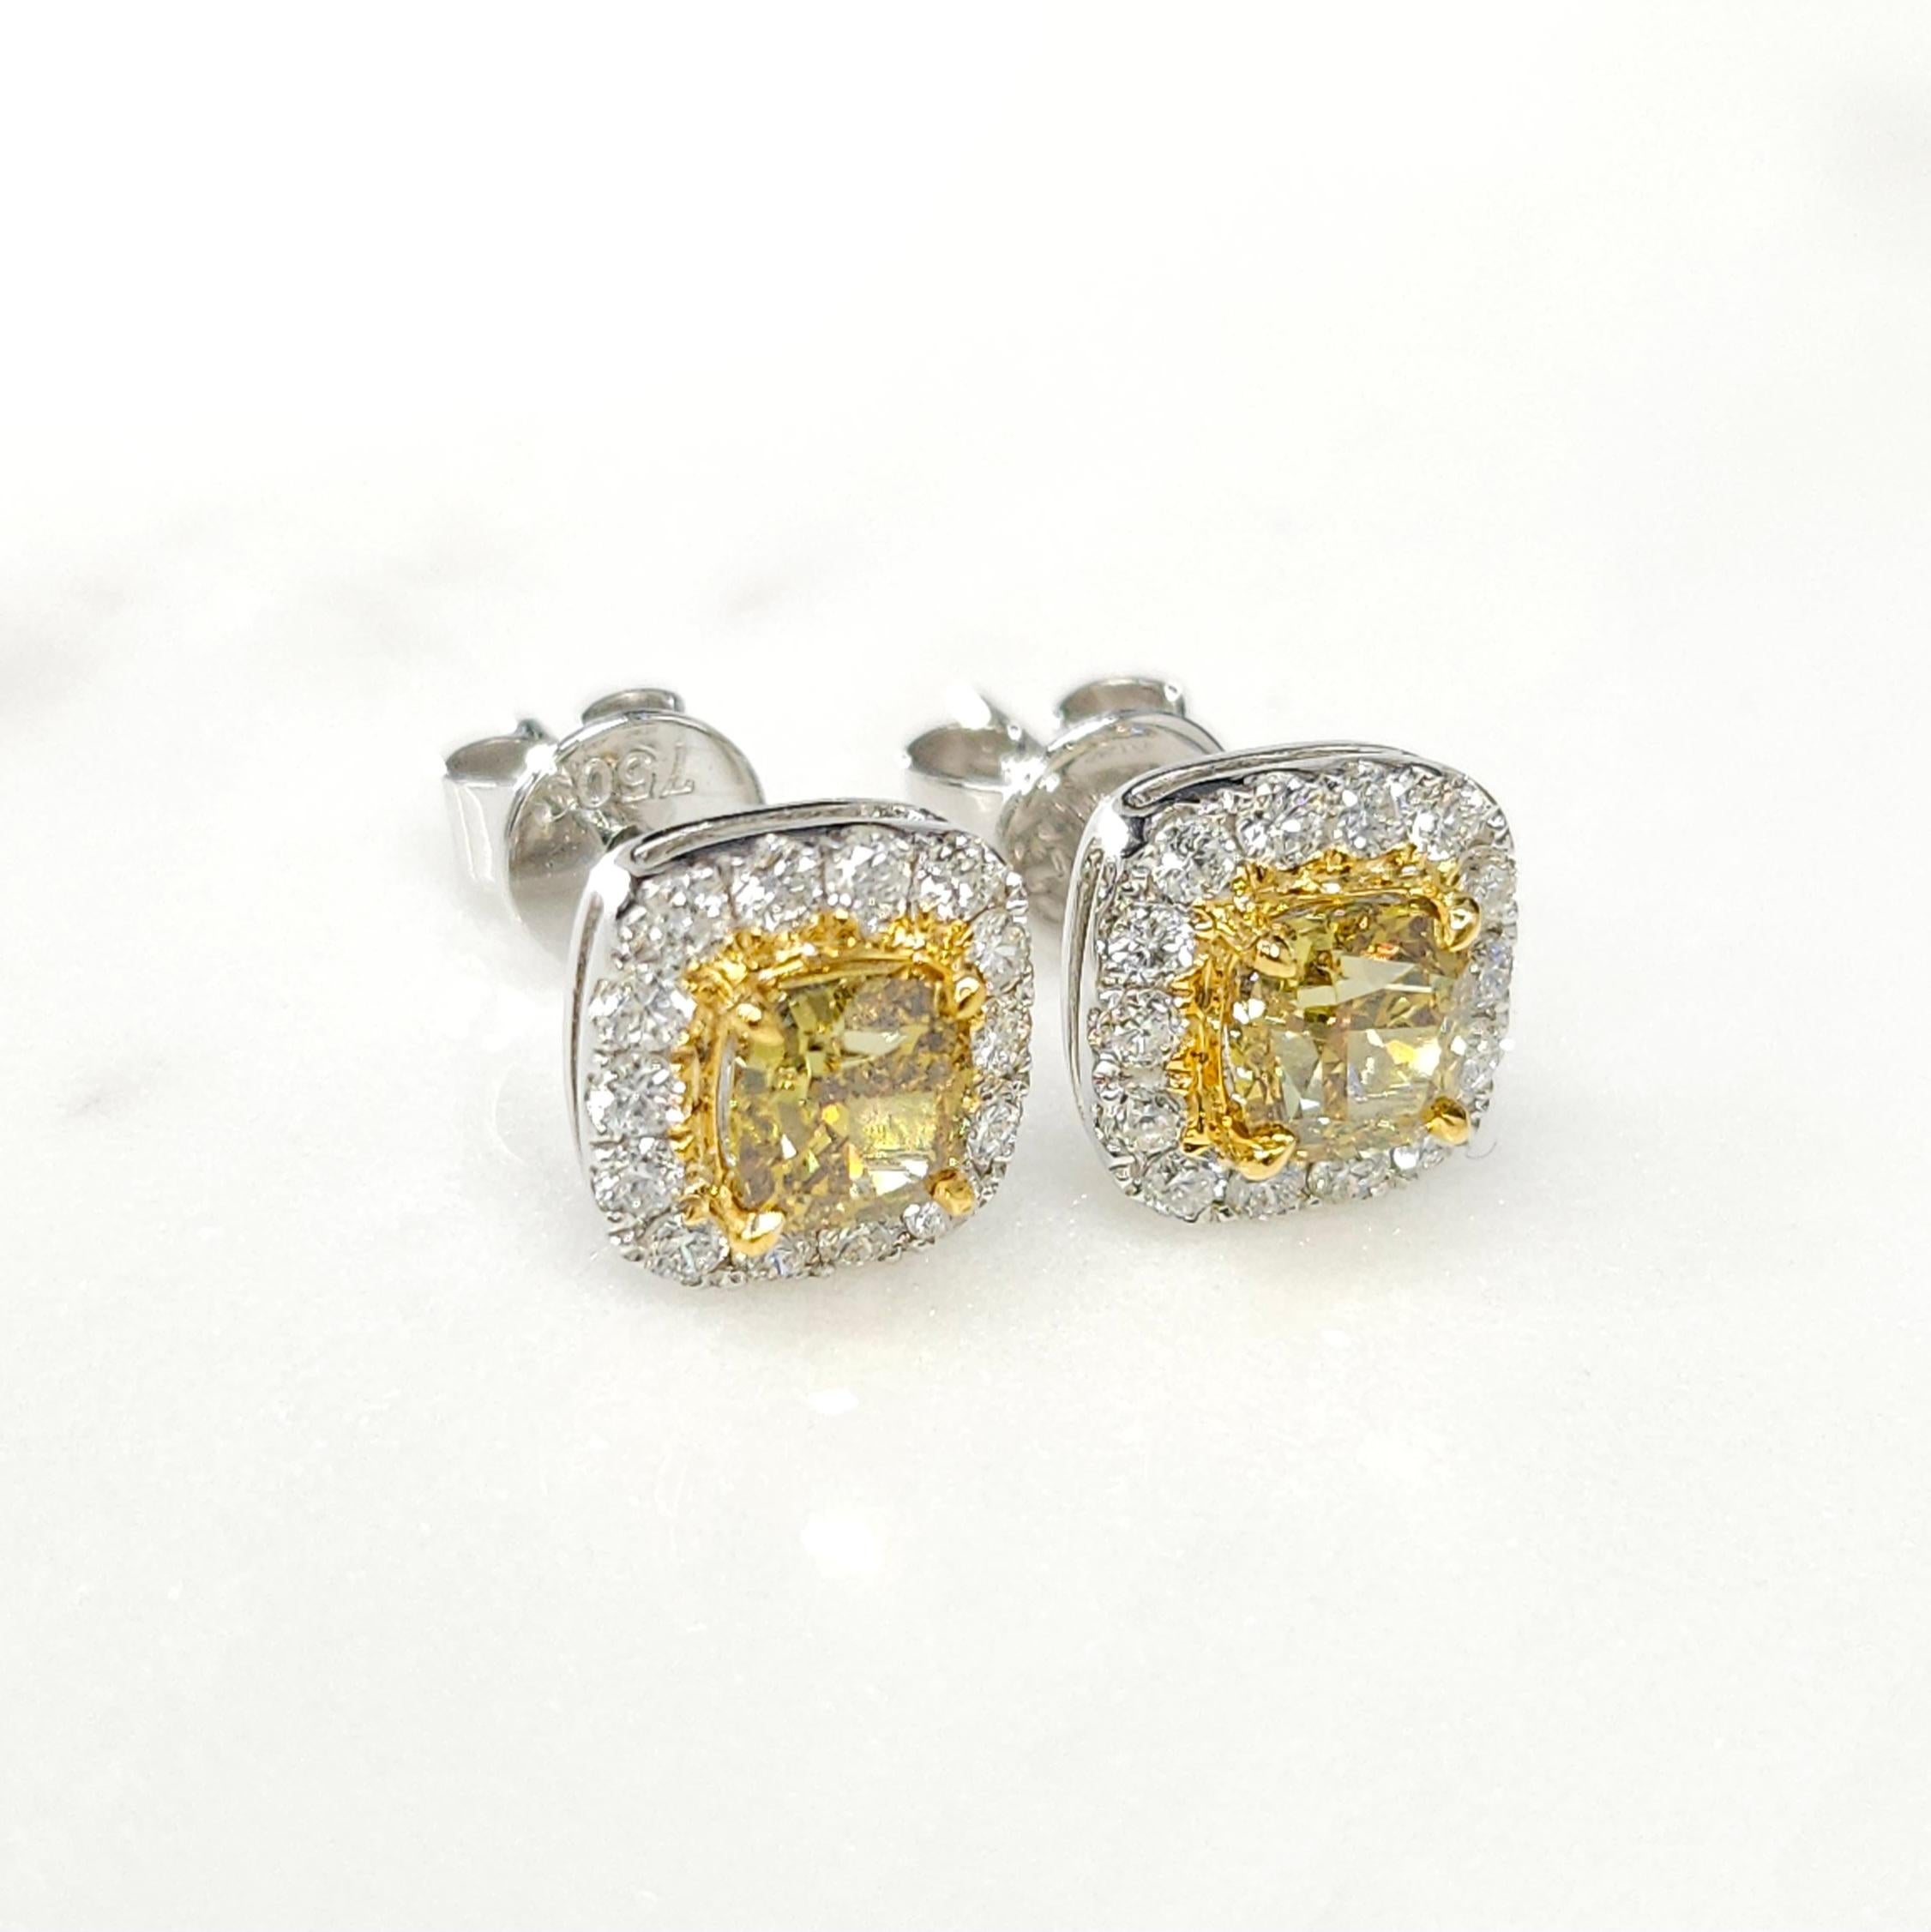 Prepare to be captivated by these enchanting IGI Certified 1.00 Carat Fancy Intense Yellow Diamond Earring Studs. Exuding elegance and radiance, these exquisite earrings feature cushion-shaped yellow diamonds that have been certified by IGI,